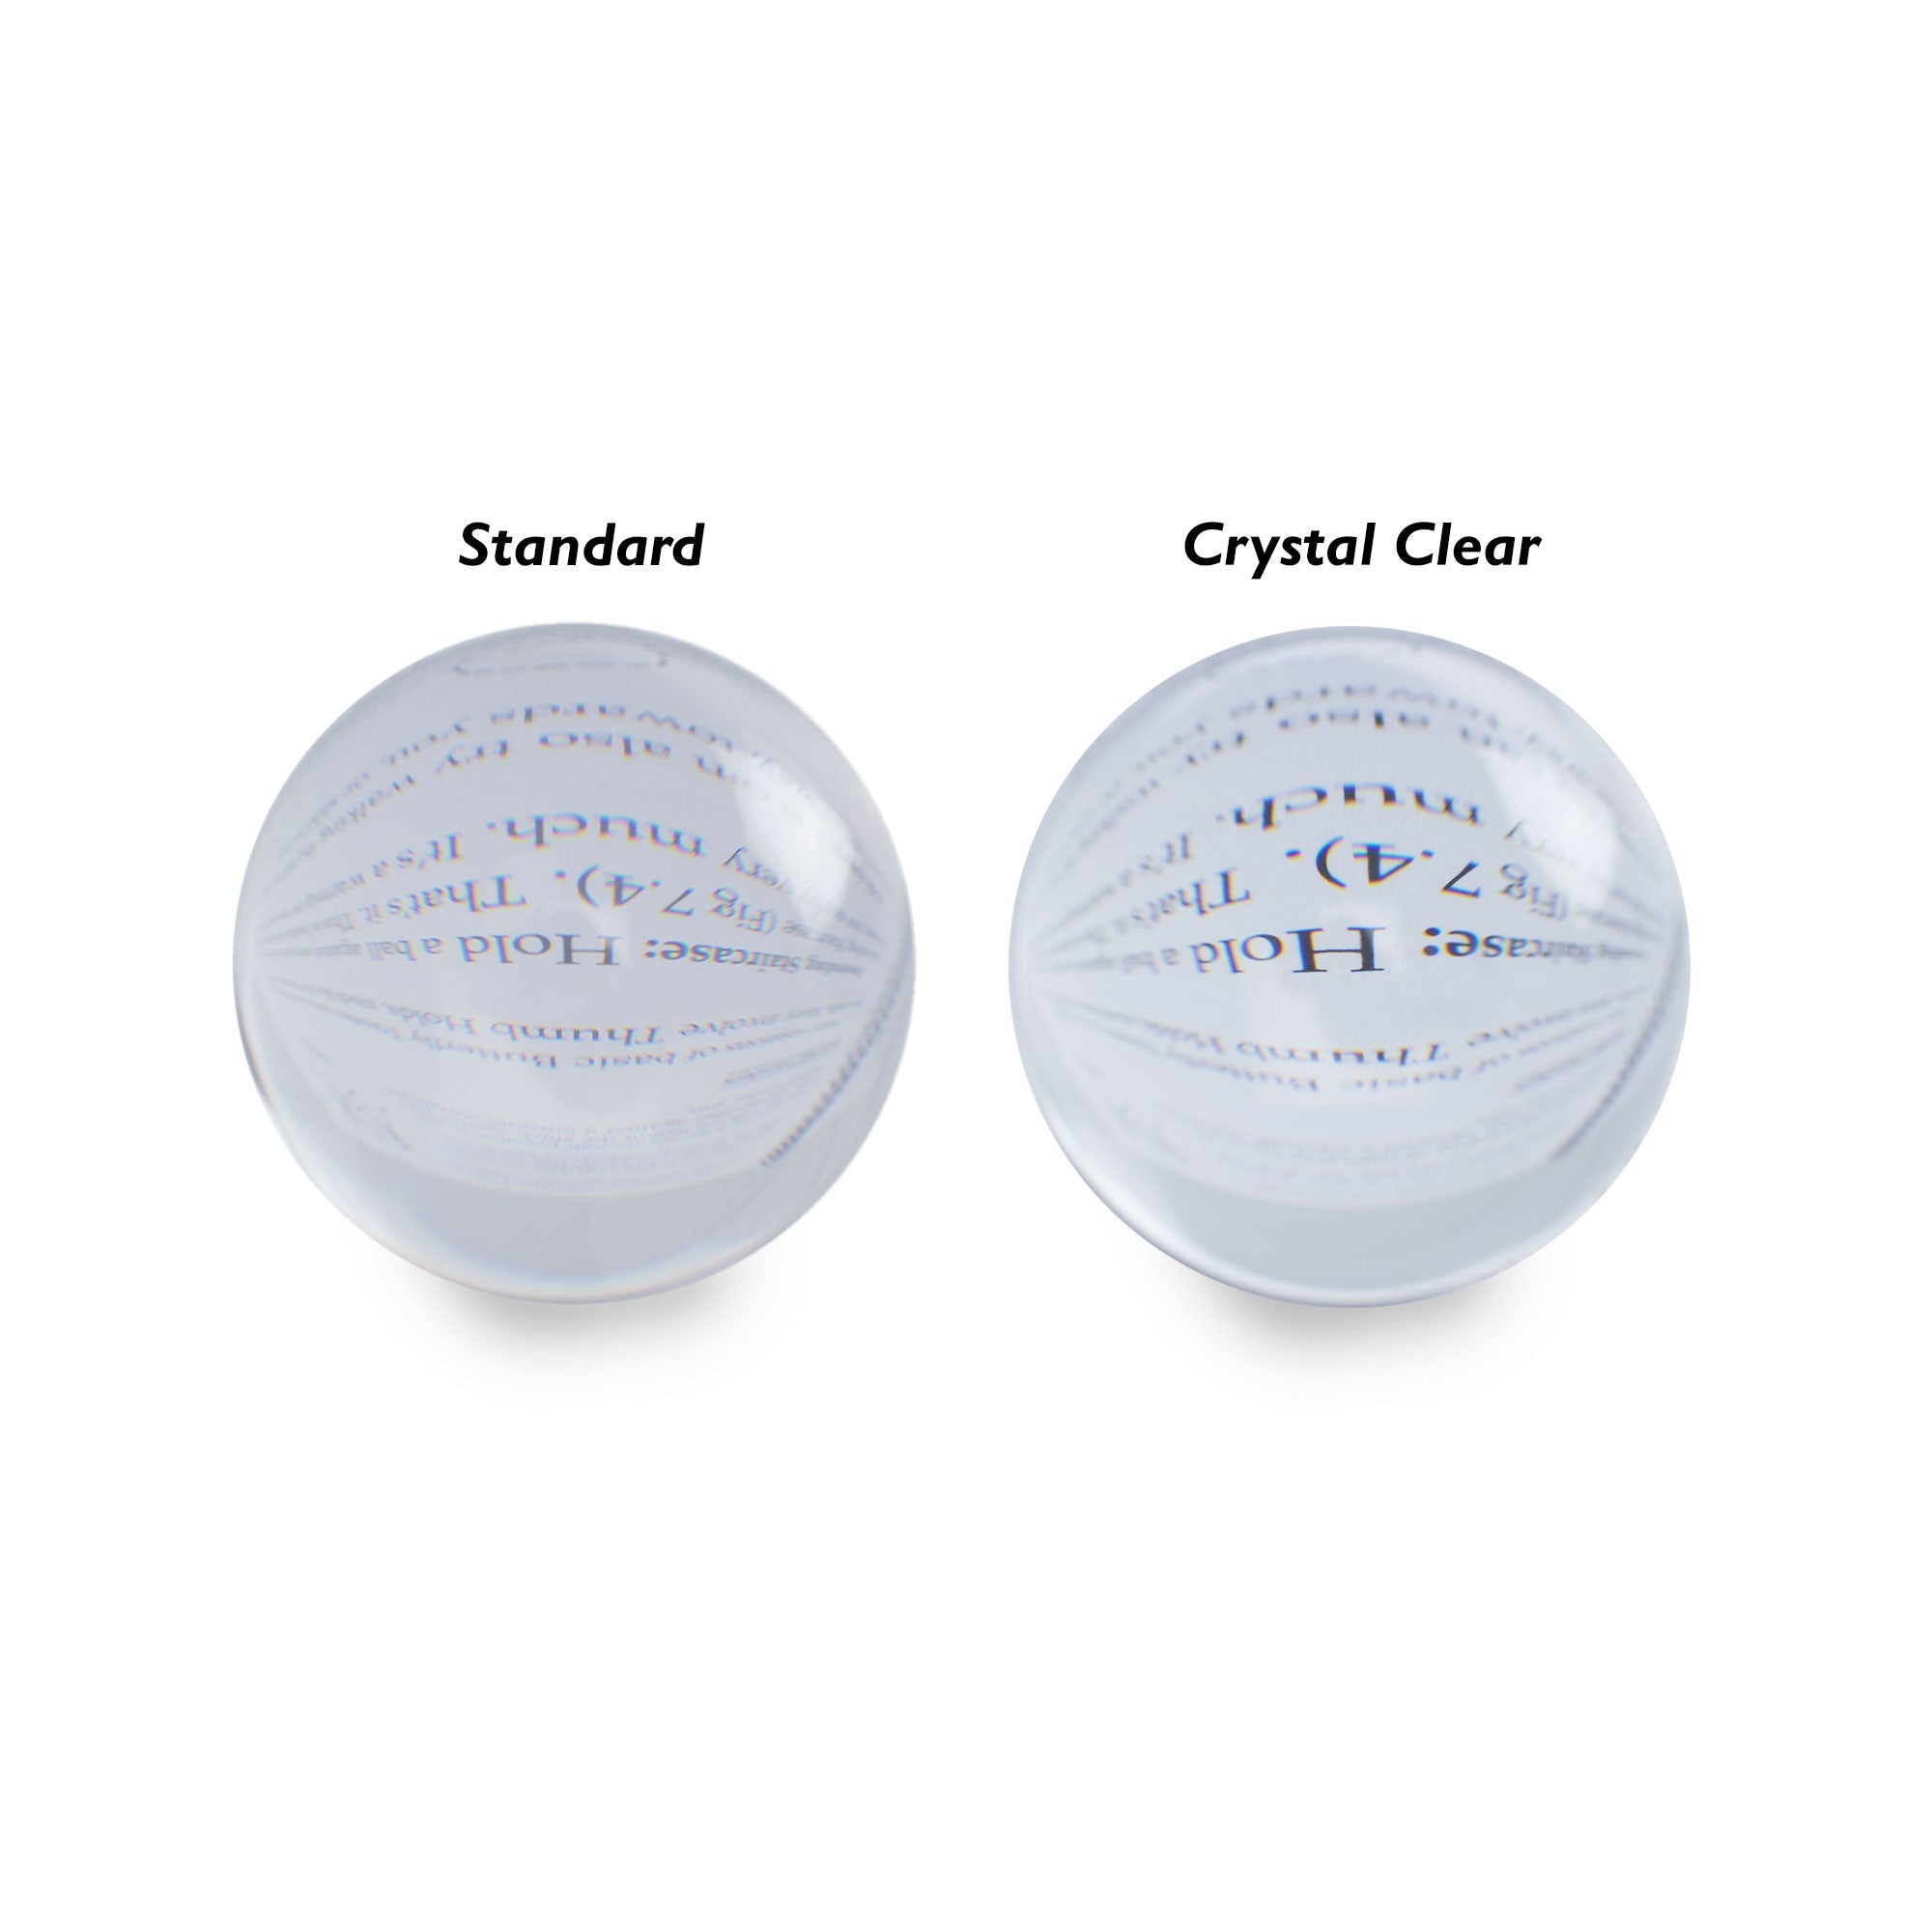 standard clear and crystal clear contact ball side by side